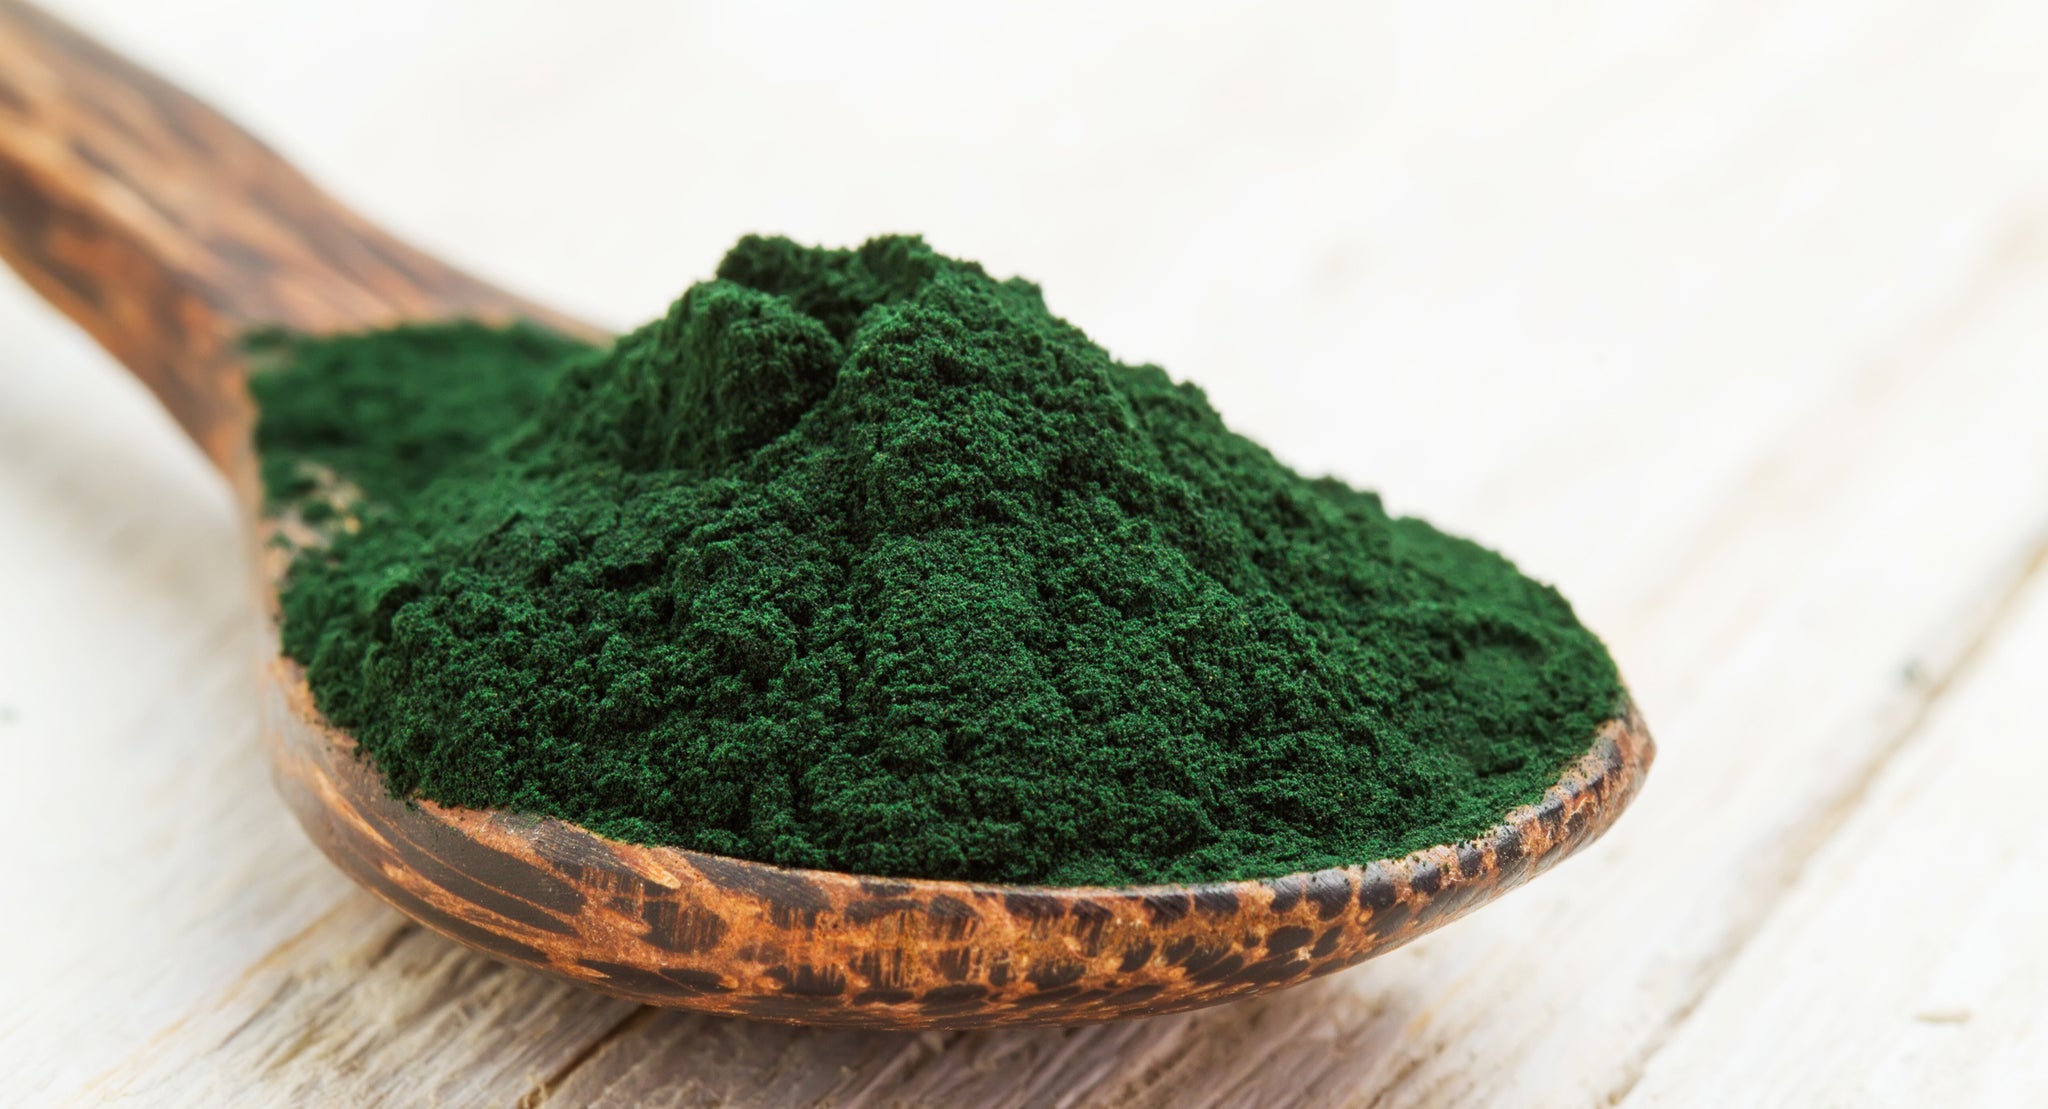  Spirulina  Extract Could Algae  be Good for Your Skin 